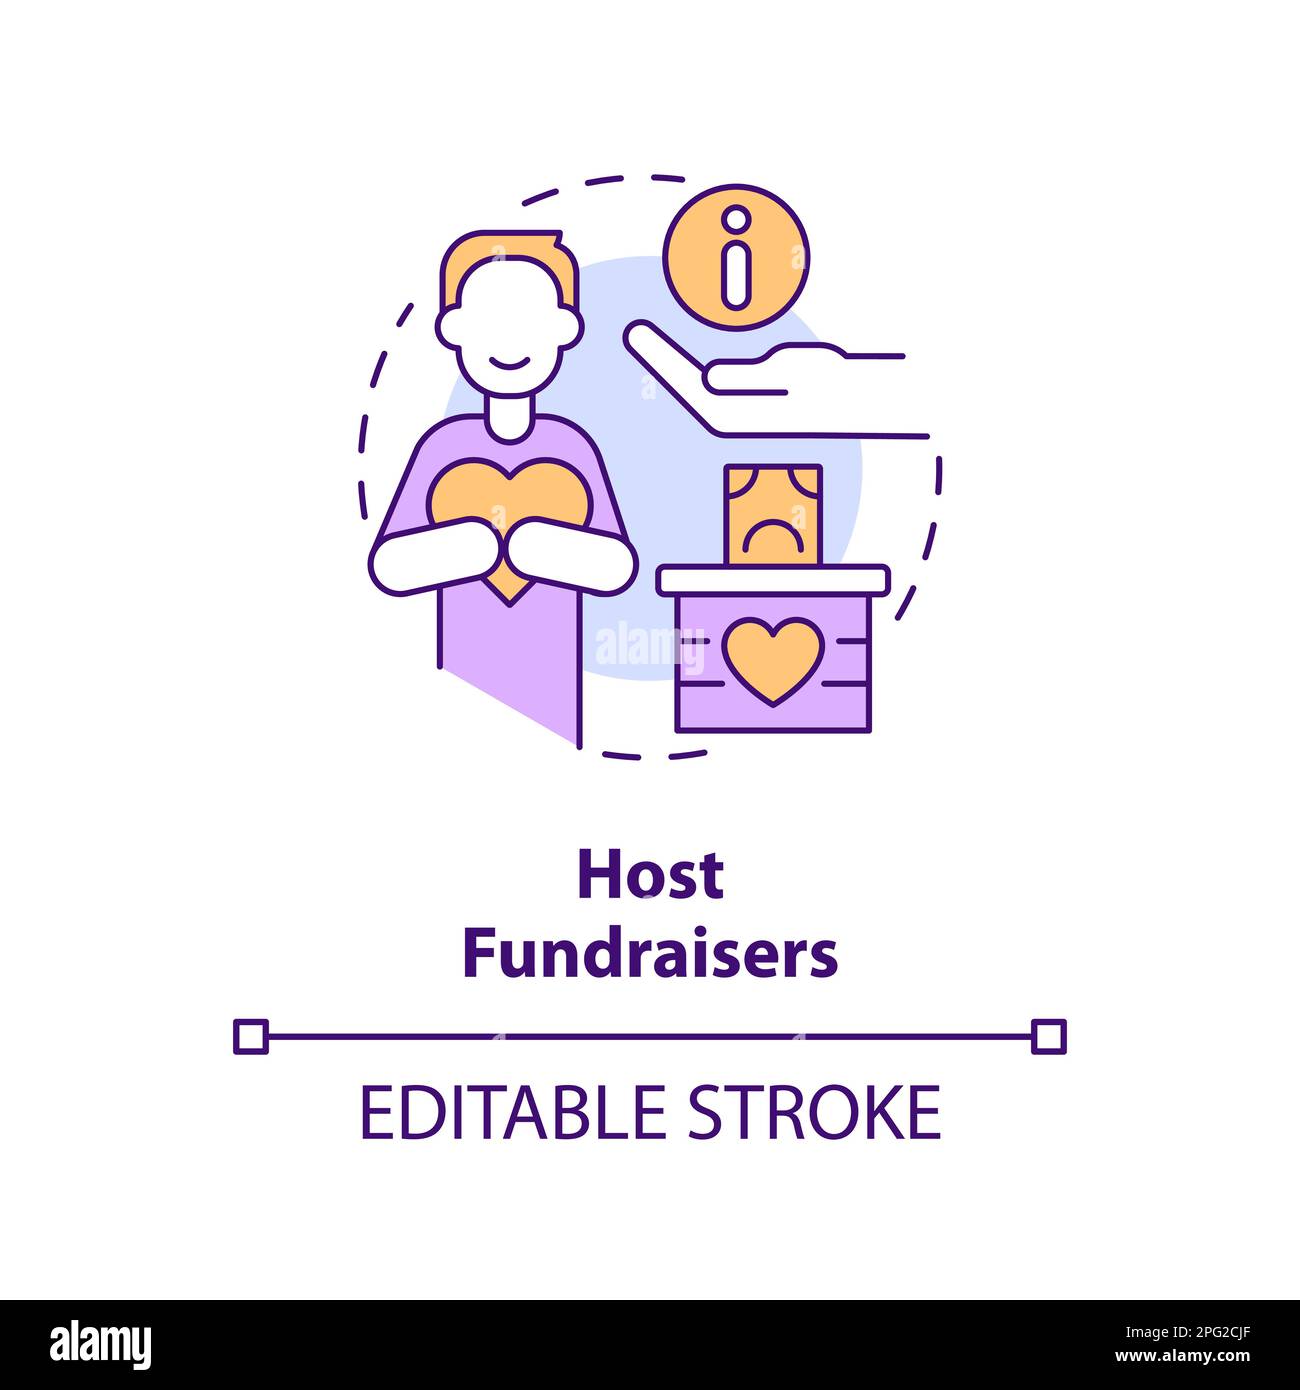 Host fundraisers concept icon Stock Vector